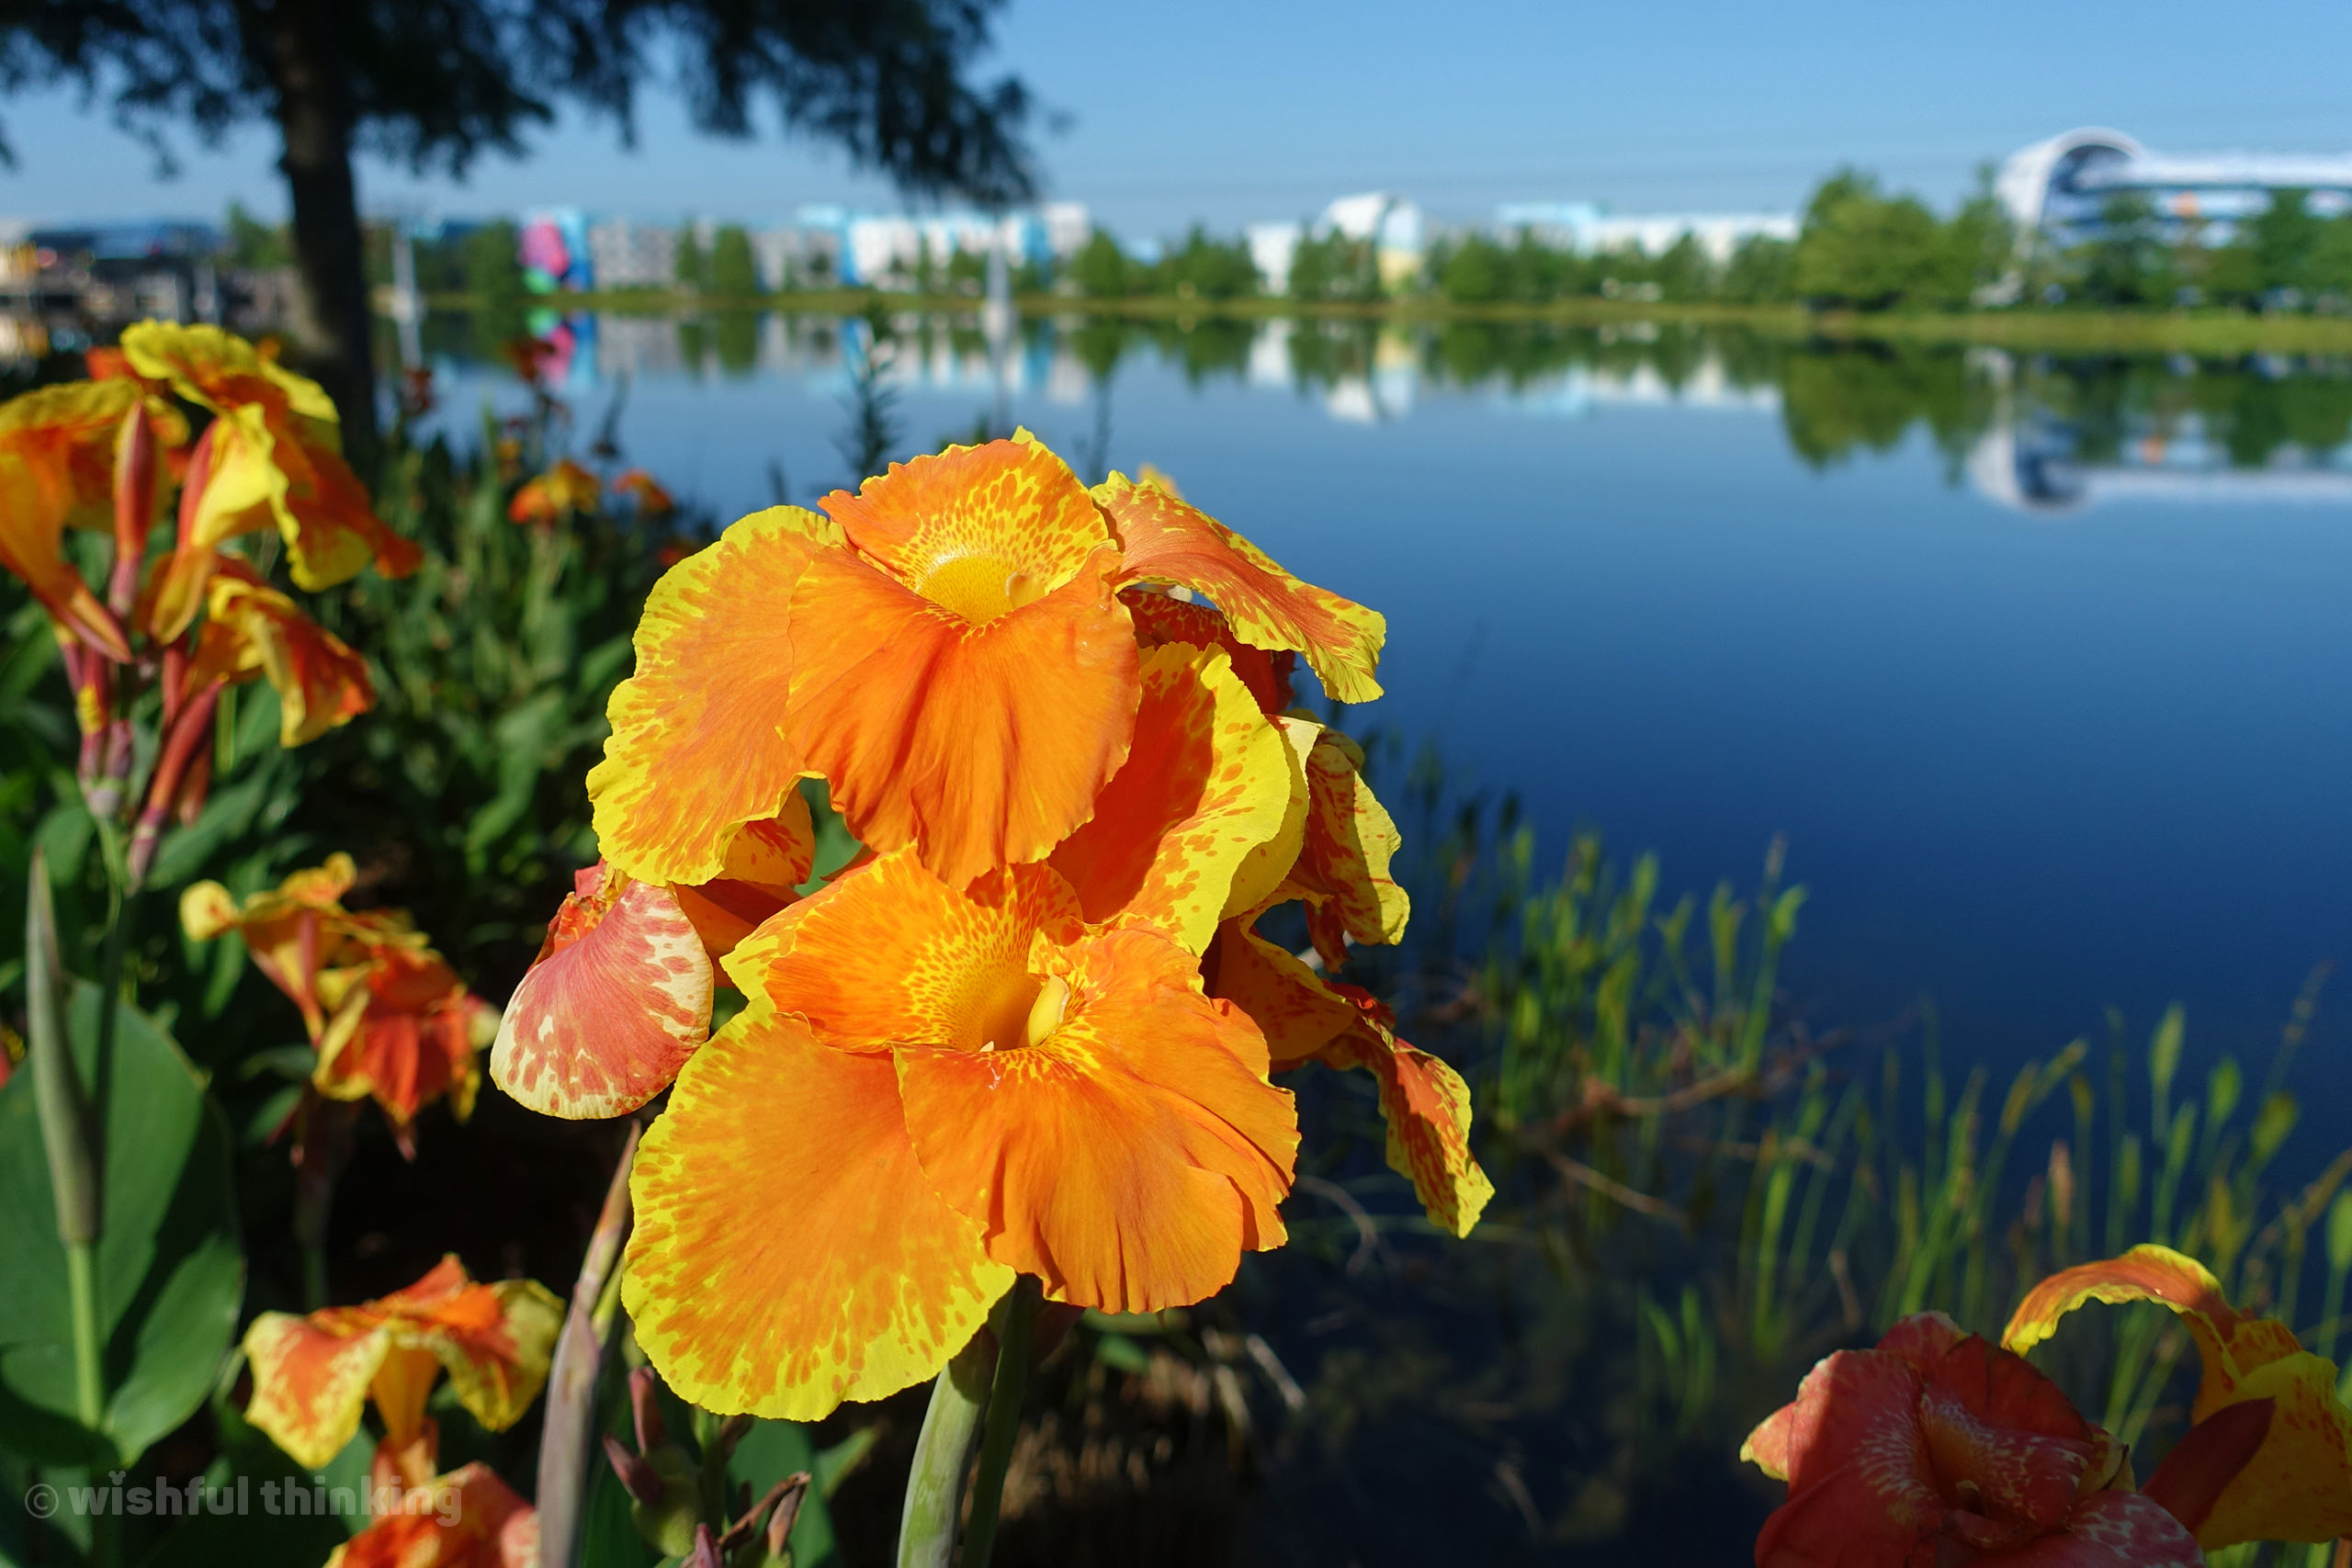 Waterfront flowers dazzle in the afternoon sun near the Art of Animation Resort in Orlando, Florida's Walt Disney World